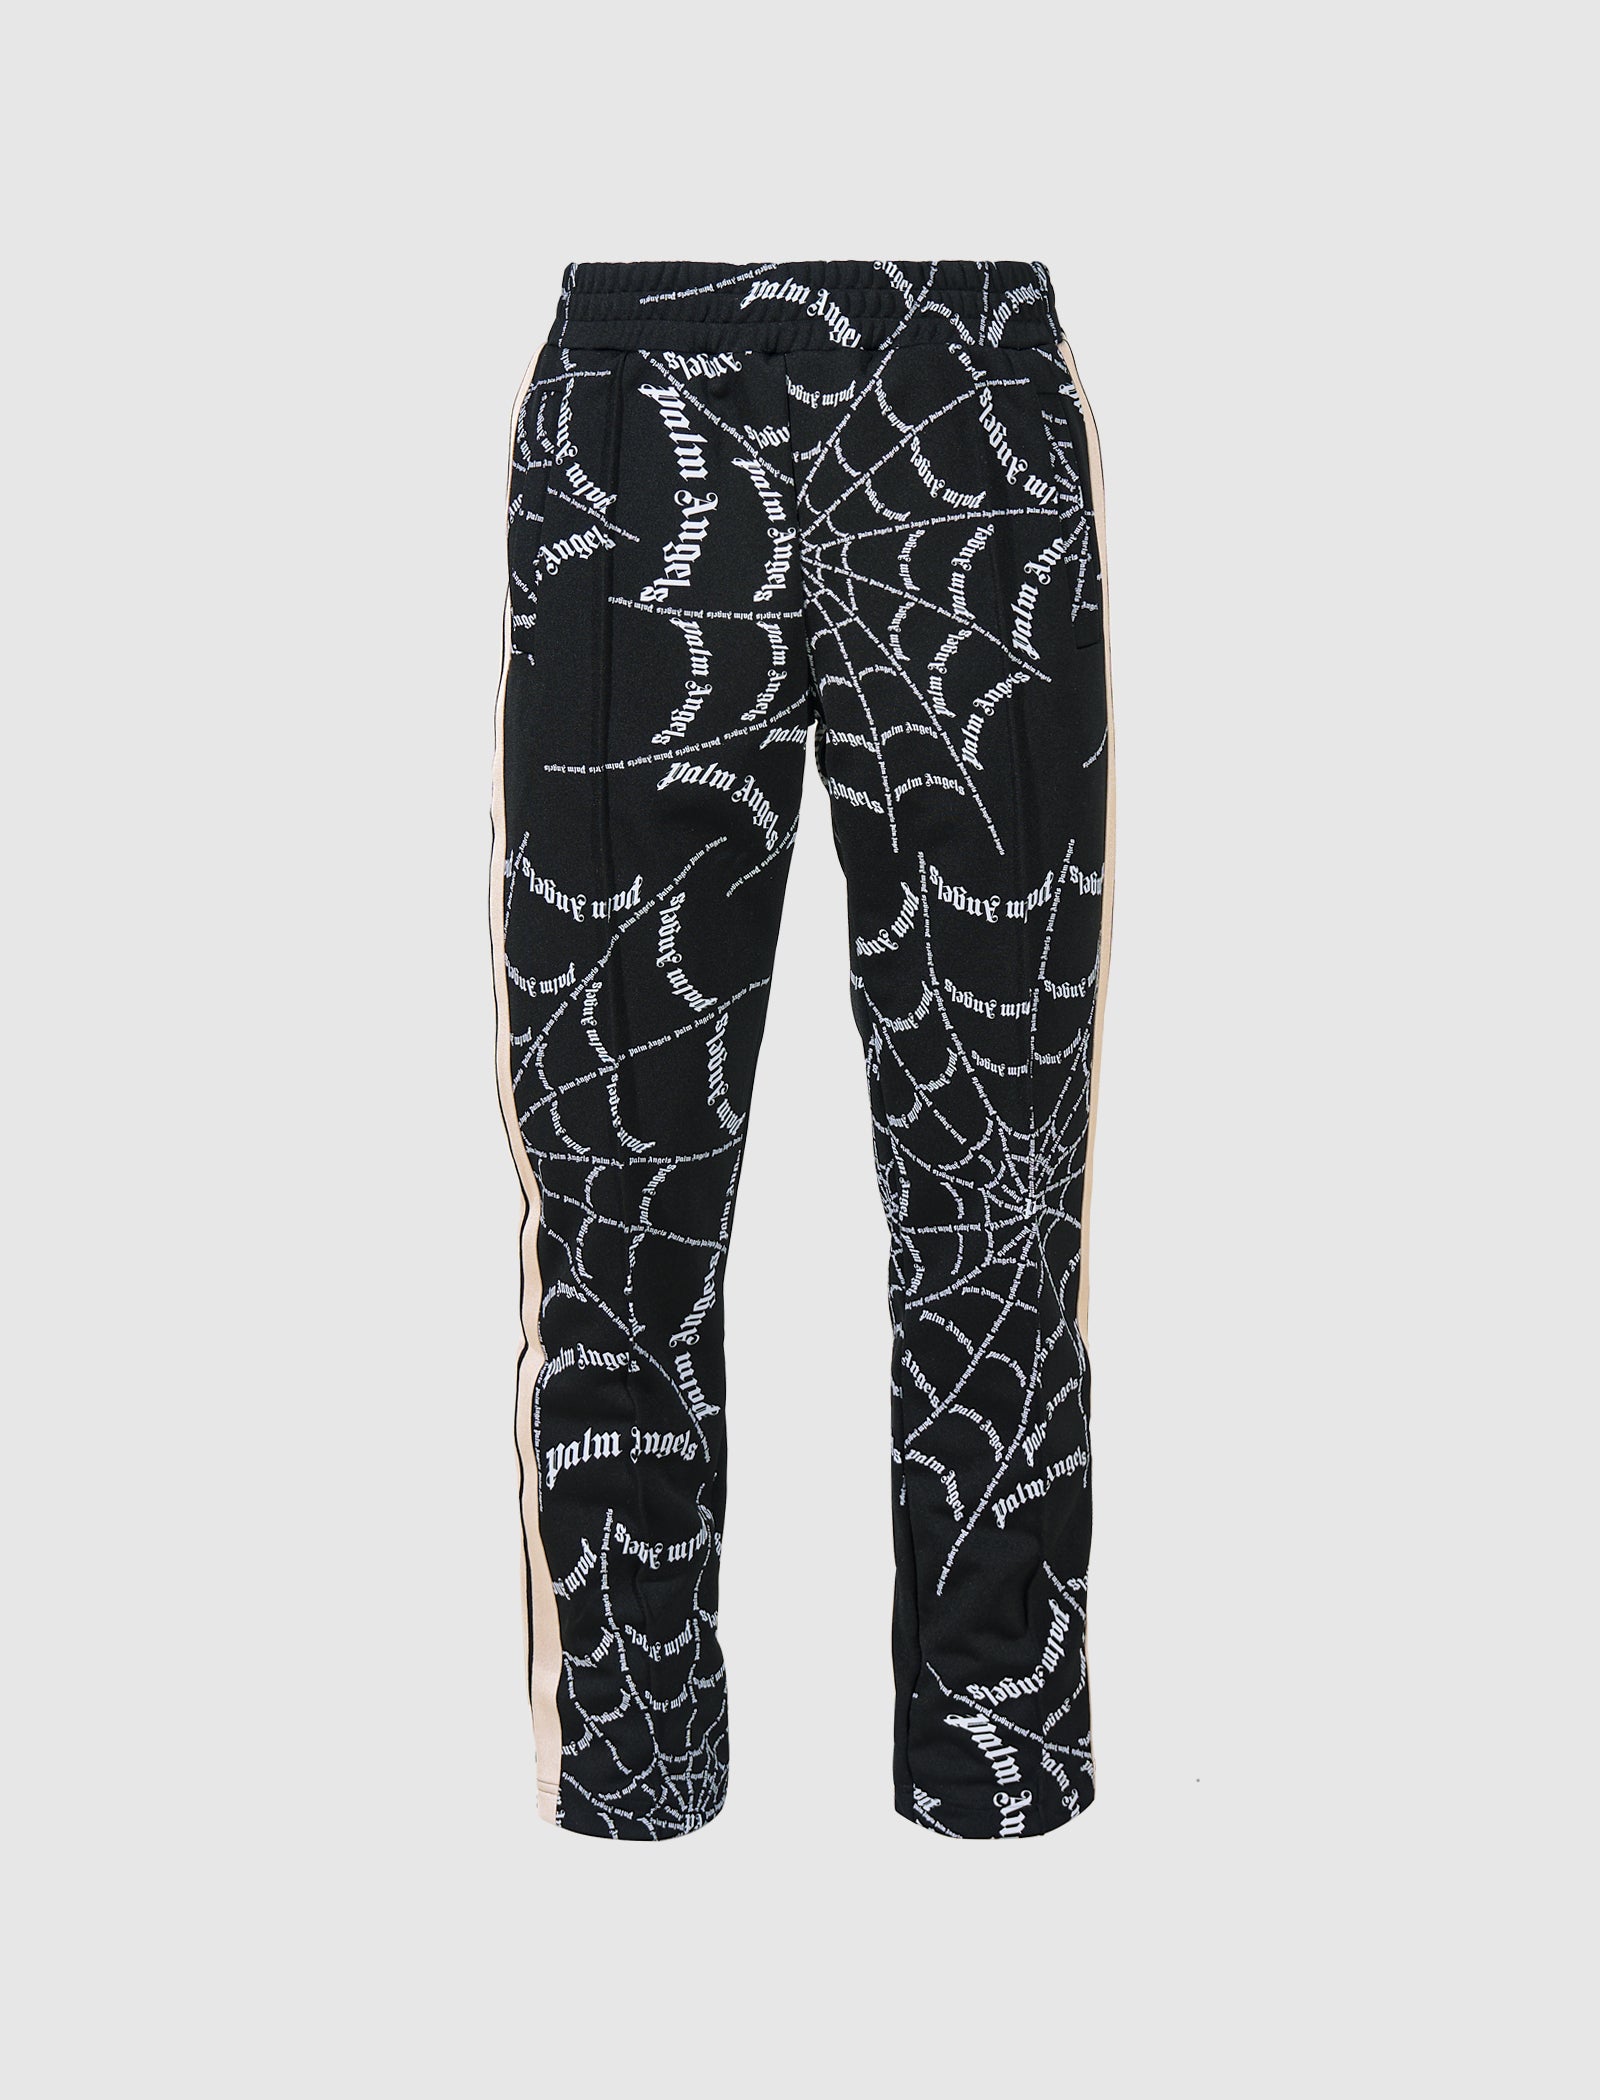 PALM ANGELS SPIDER WEB TRACK PANT